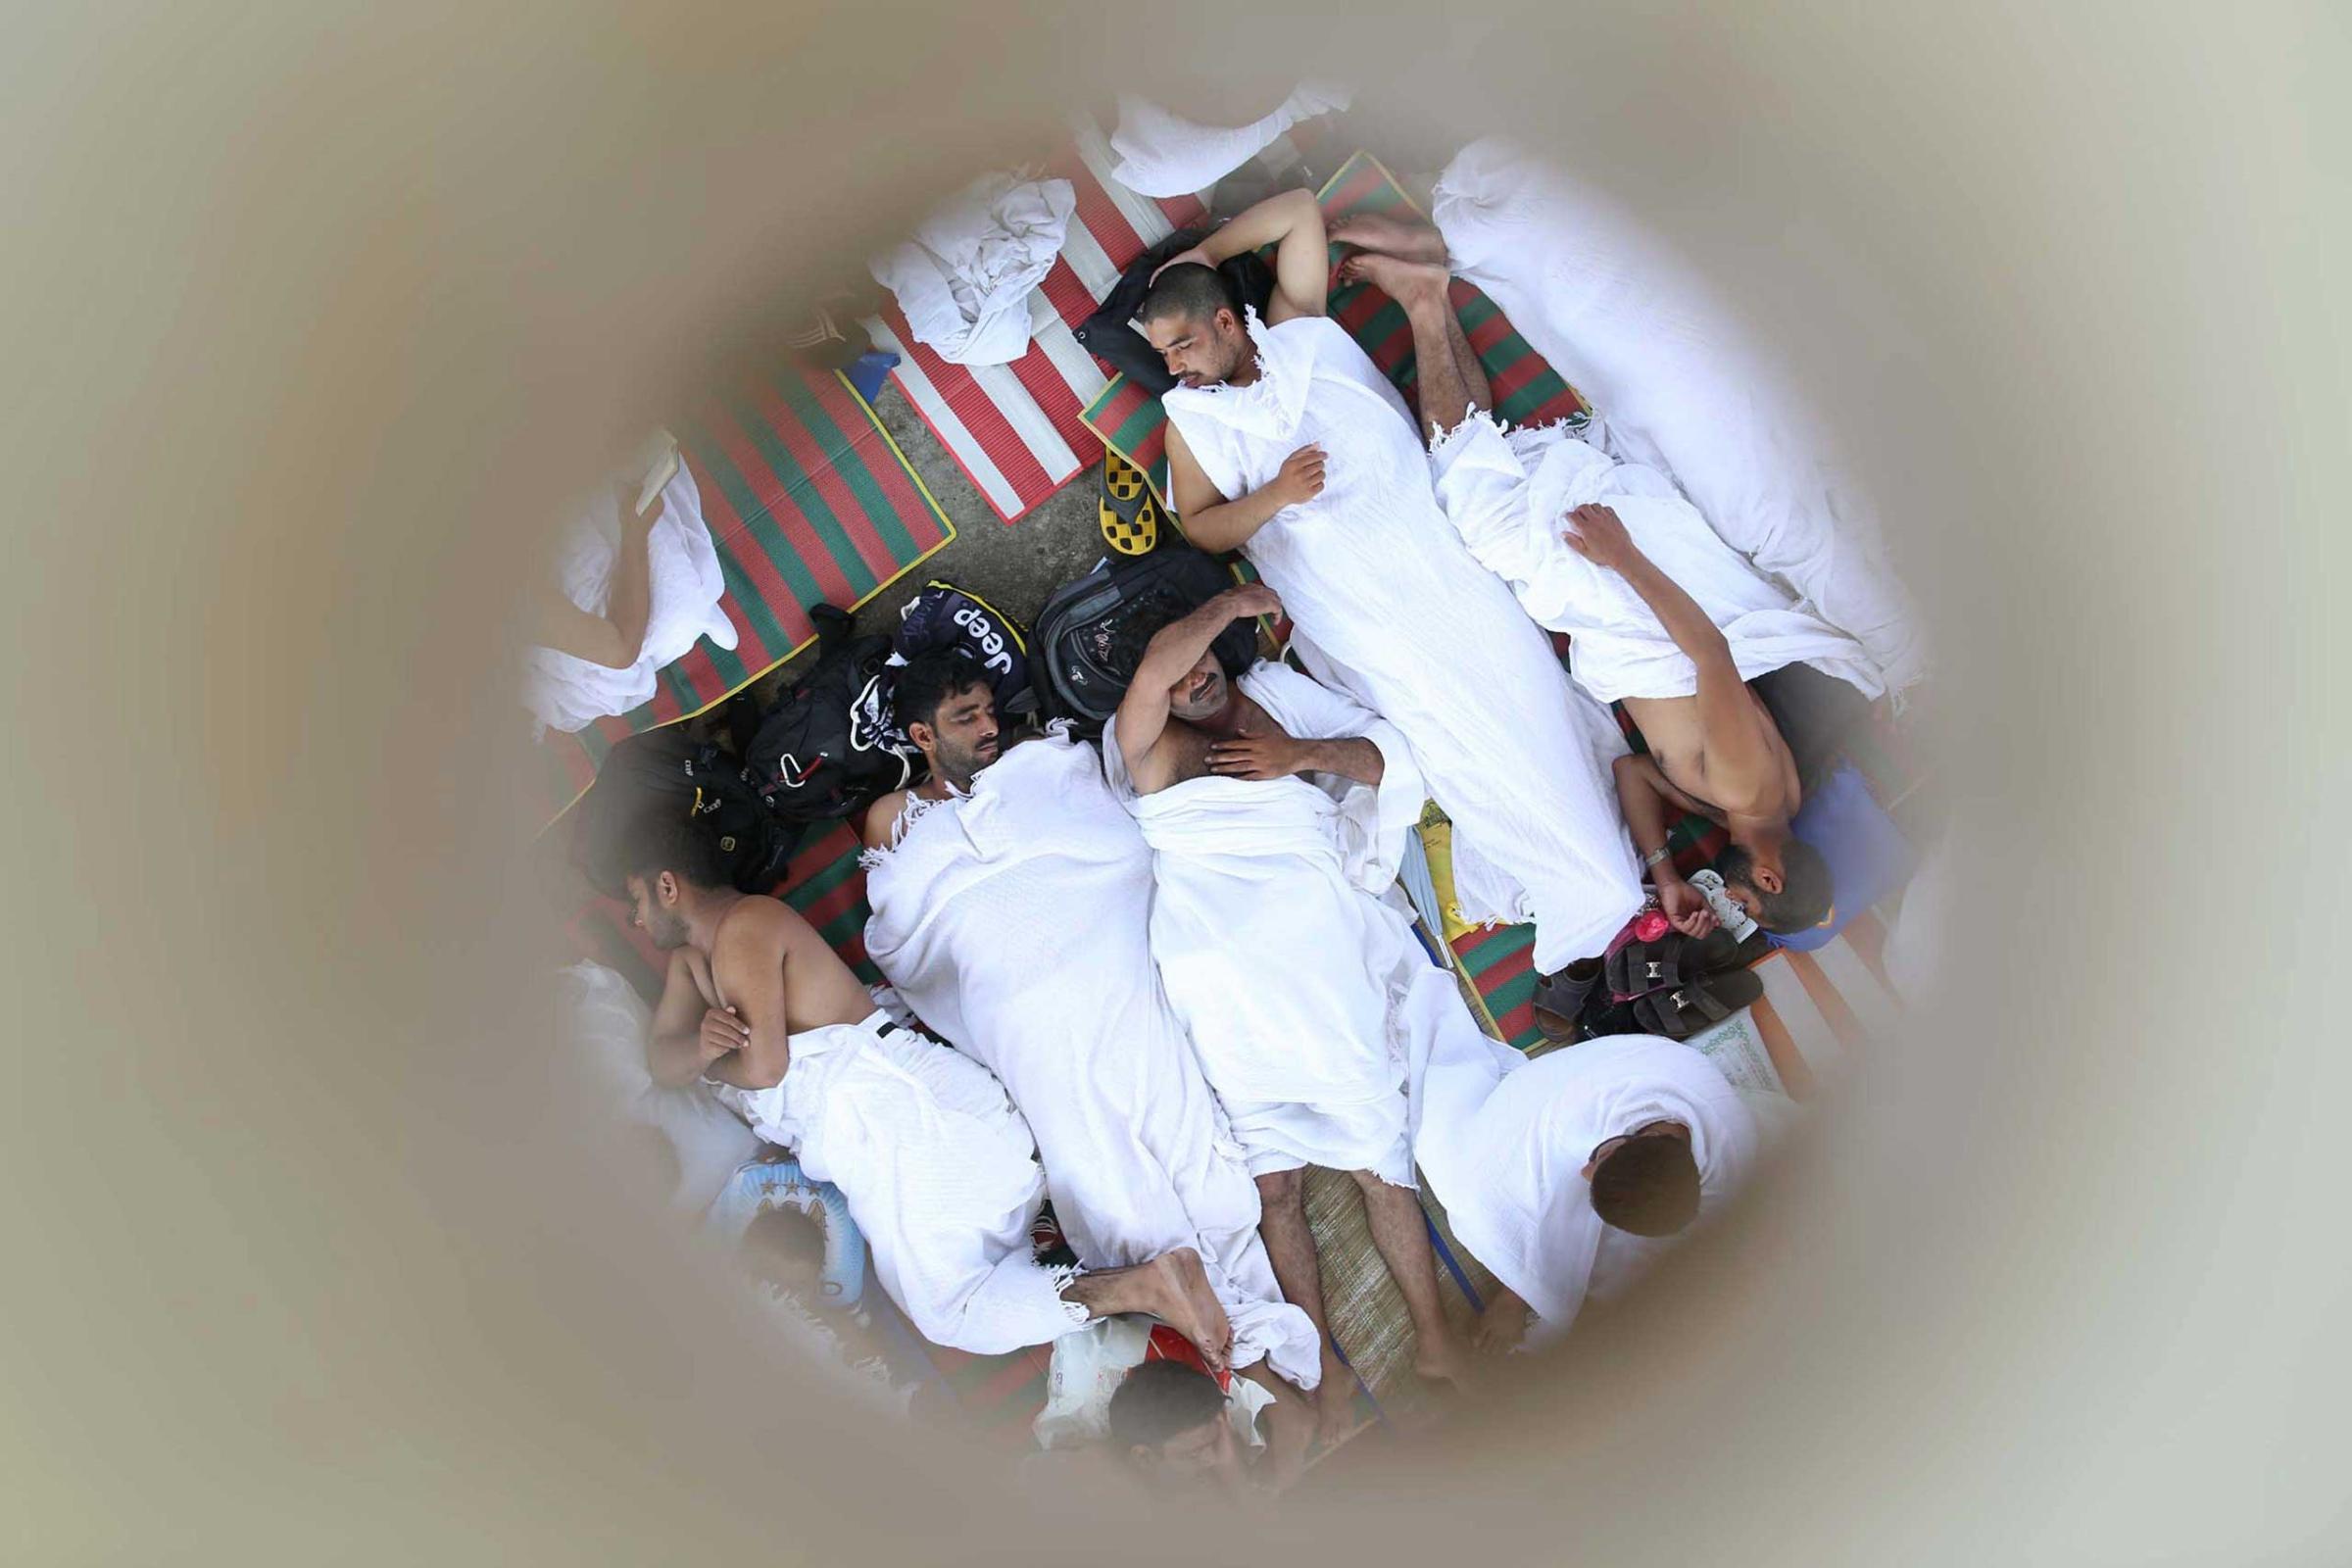 Muslim pilgrims are pictured through a roof opening as they sleep during the annual haj pilgrimage in Mena, near the holy city of Mecca